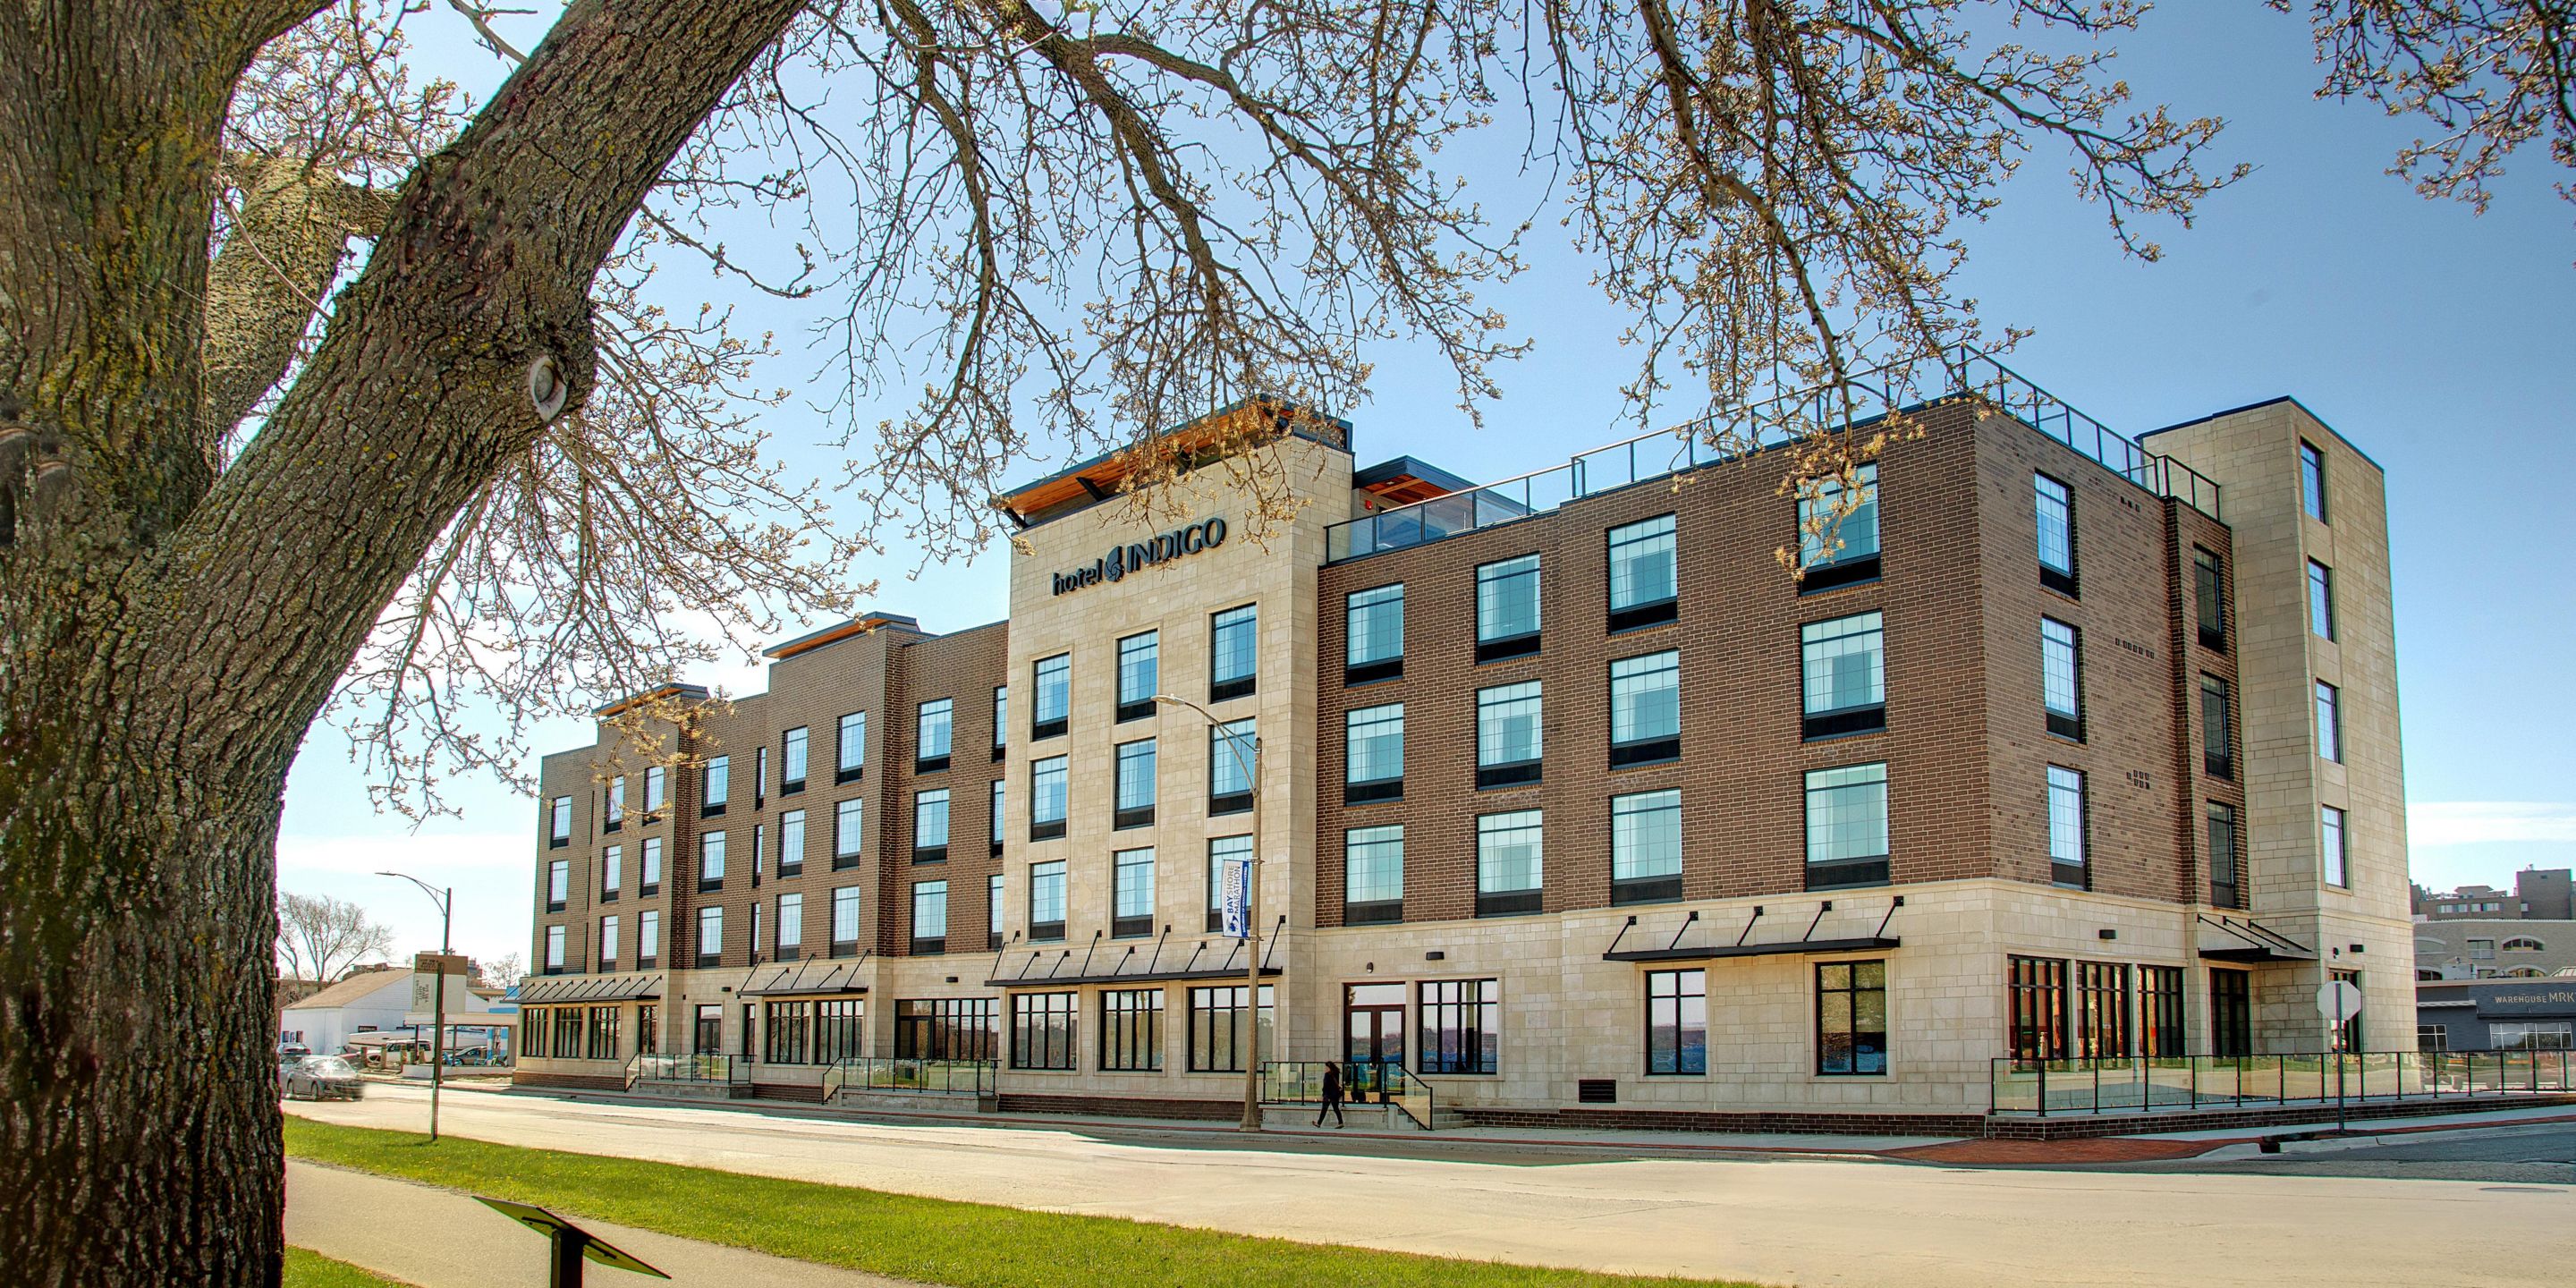 The 107-room hotel is located in Traverse Citys Downtown Warehouse District and is managed by TPG Hotels and Resorts